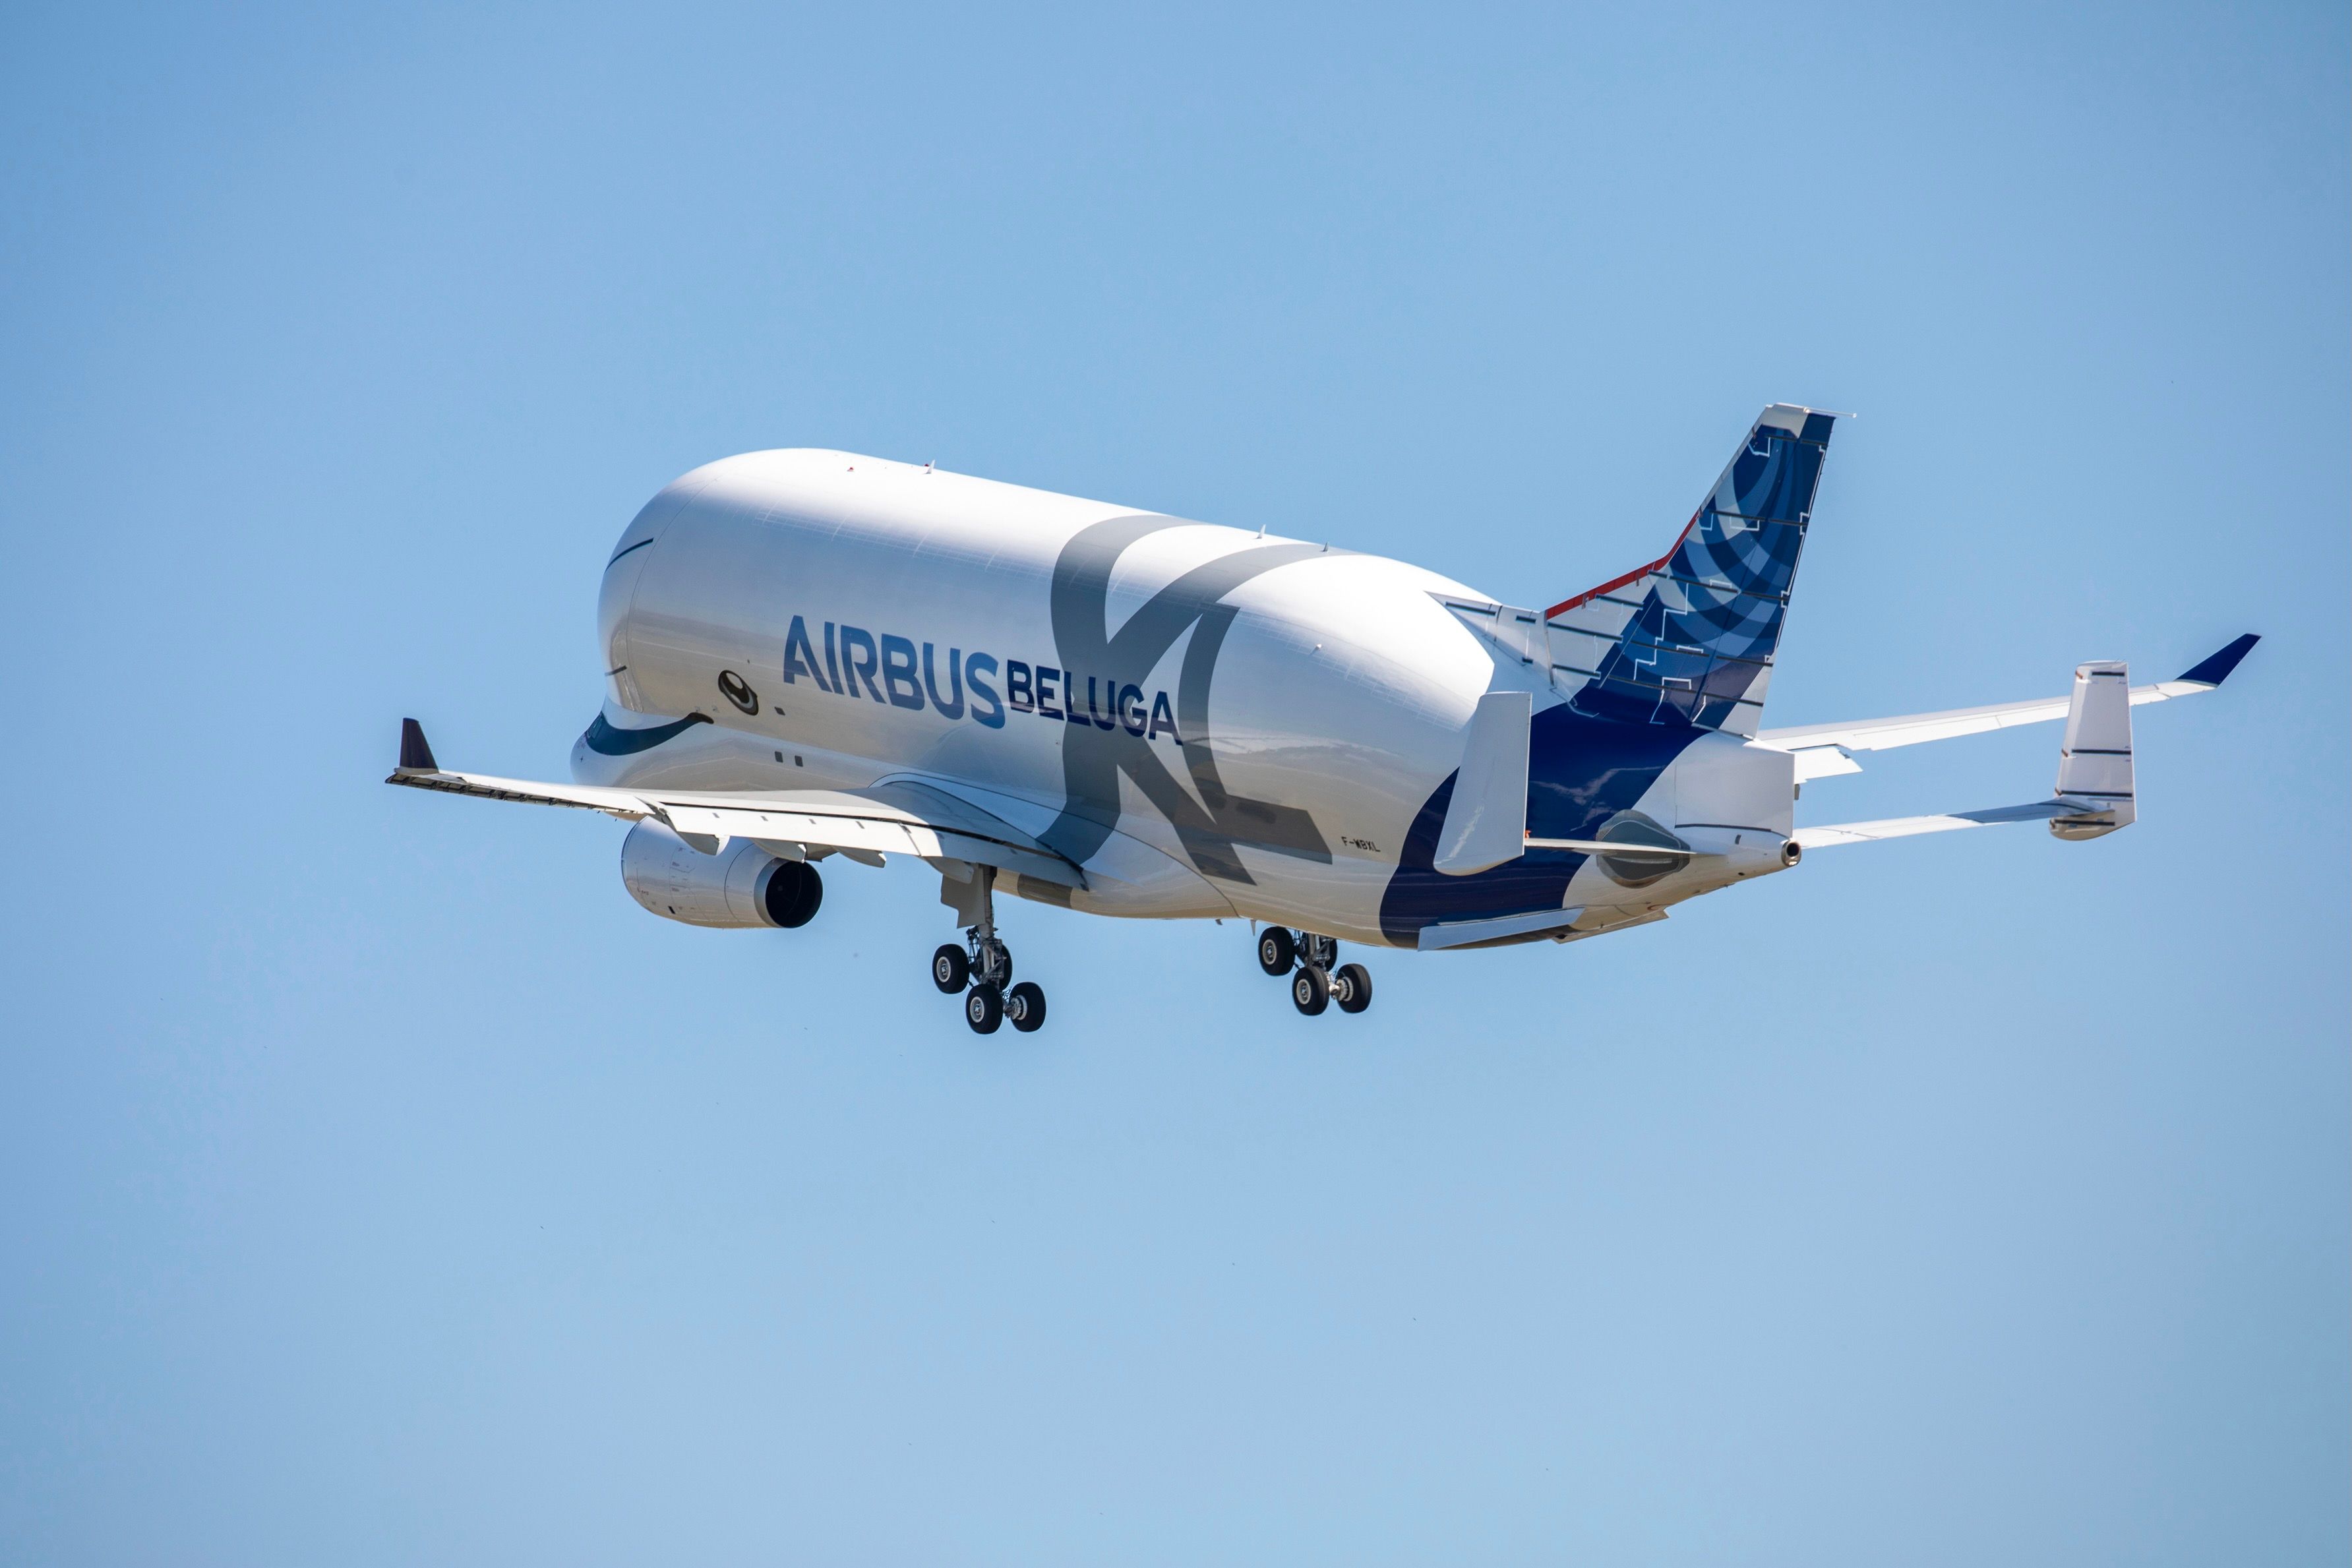 An AIrbus BelugaXL flying in the sky.